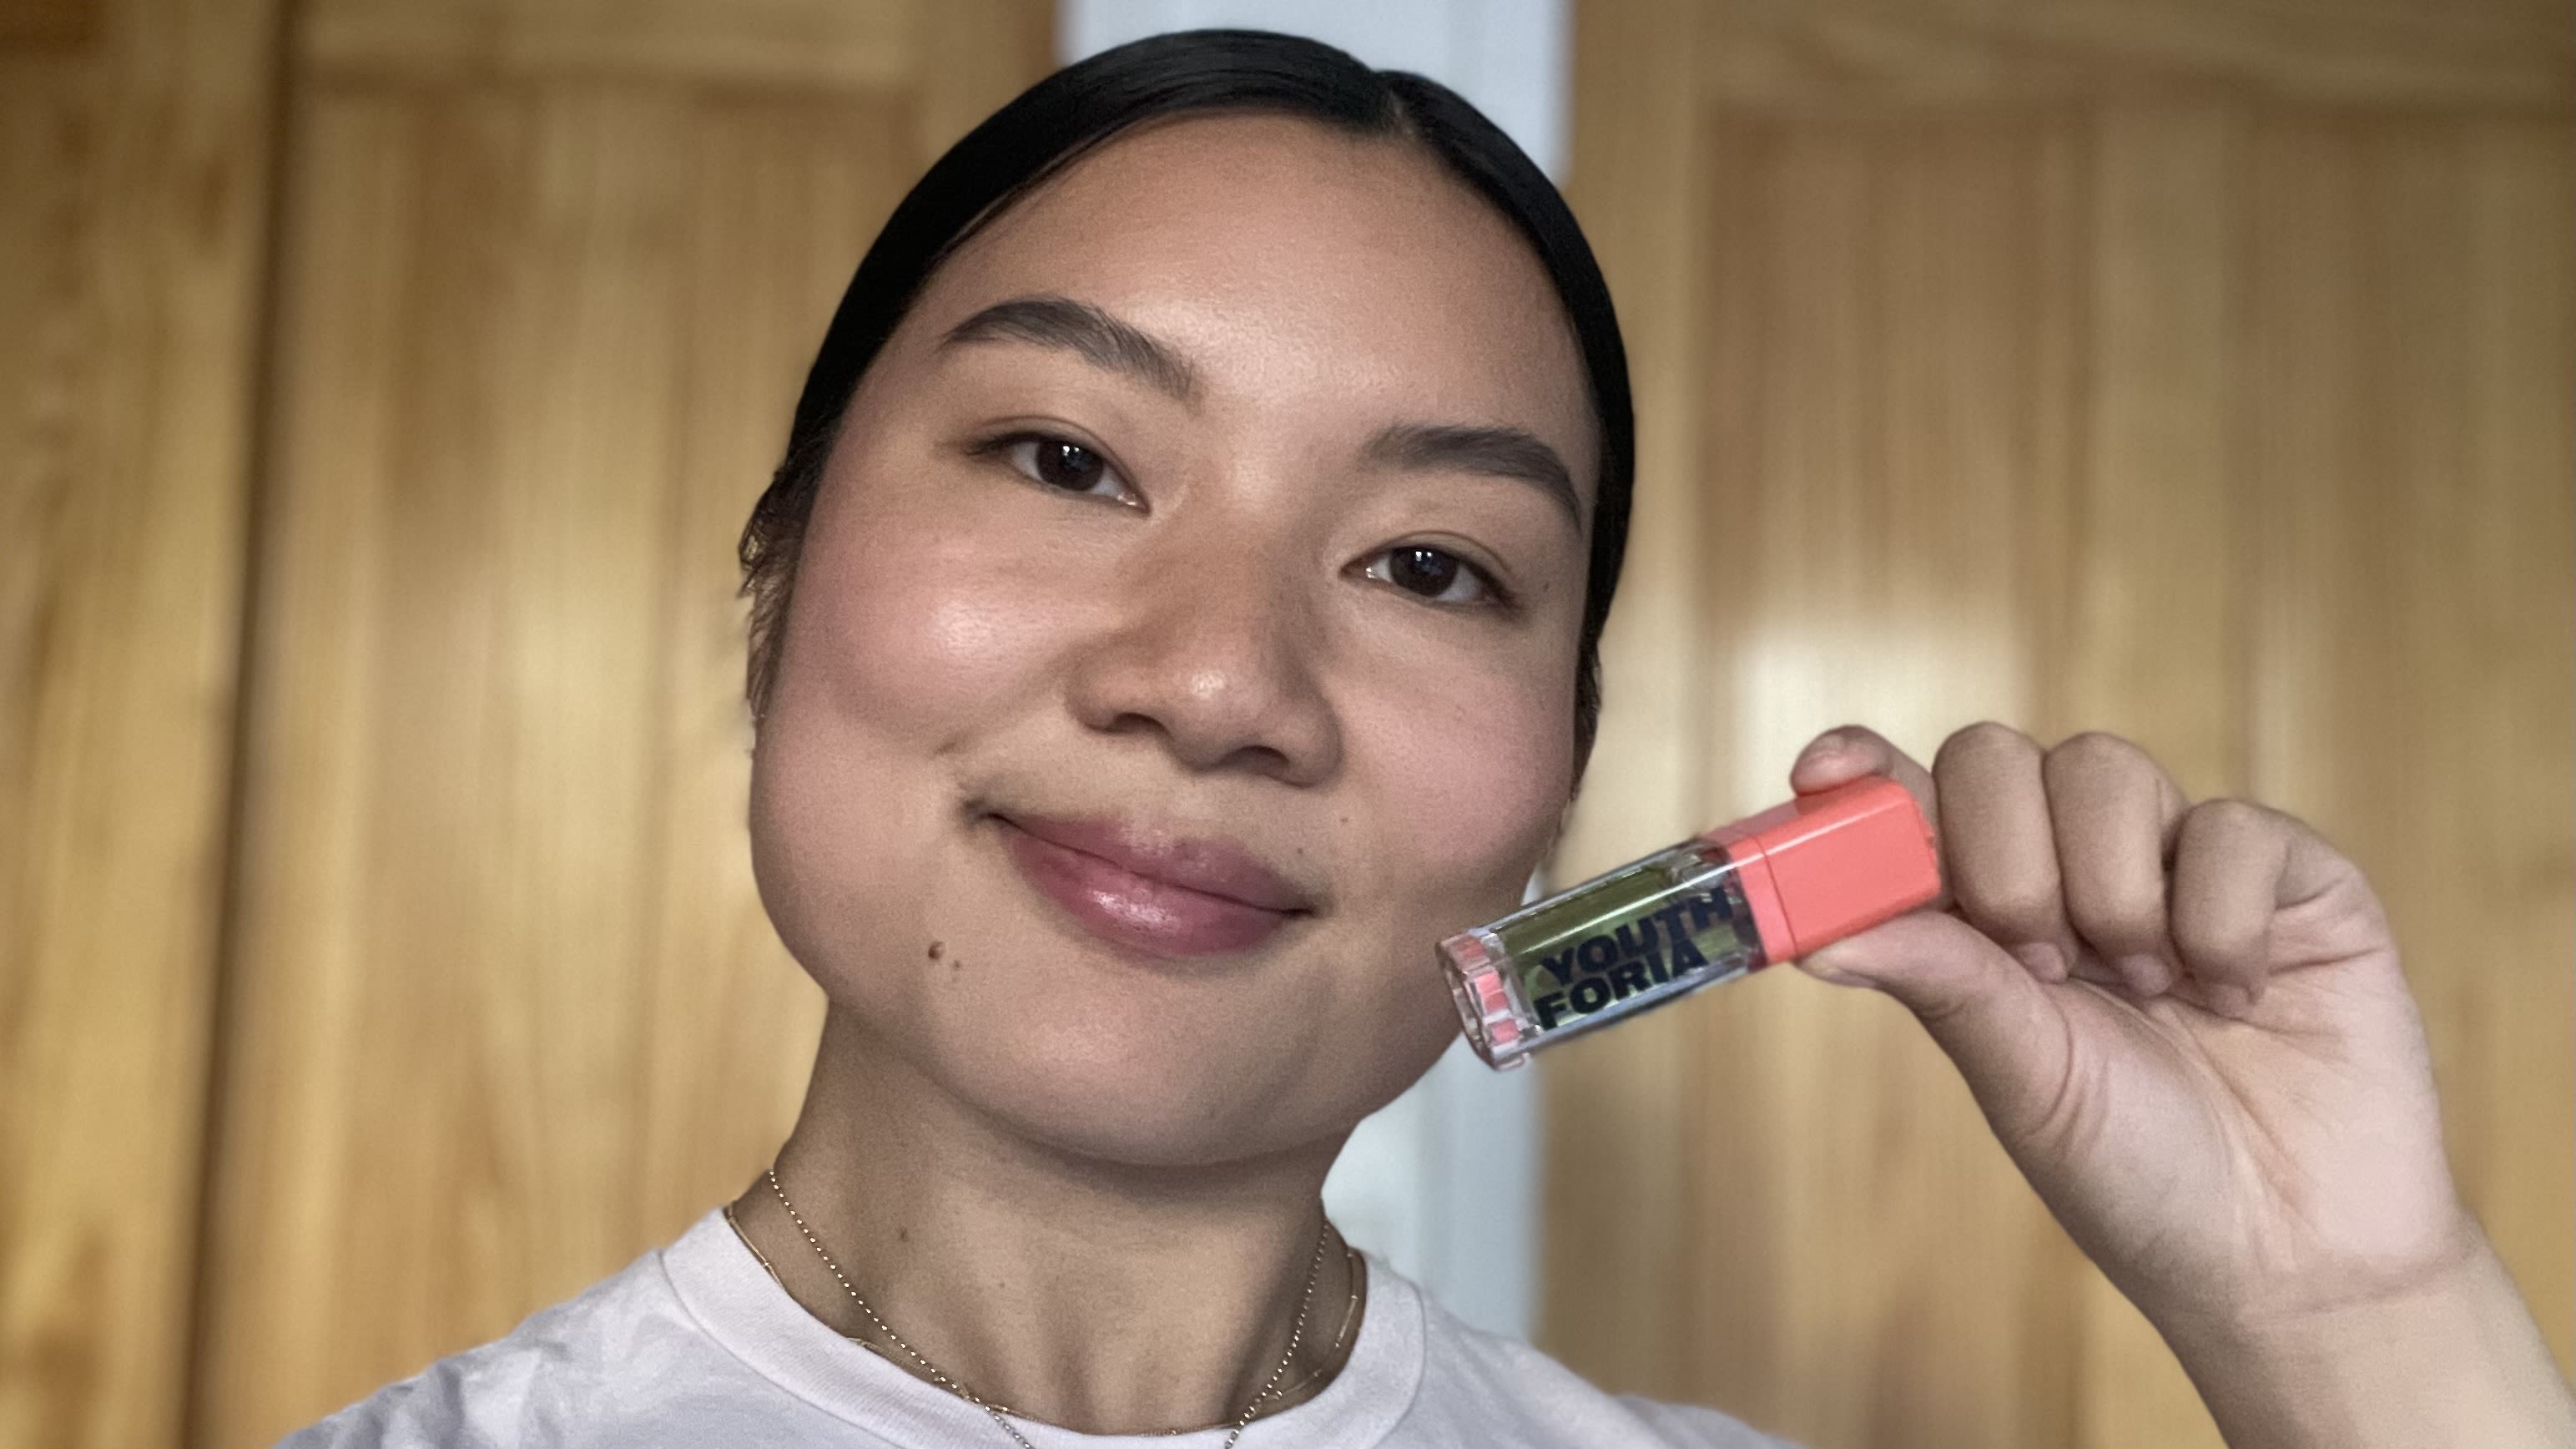 TikTok Made Me Buy It - Are These Viral Makeup Products Worth the